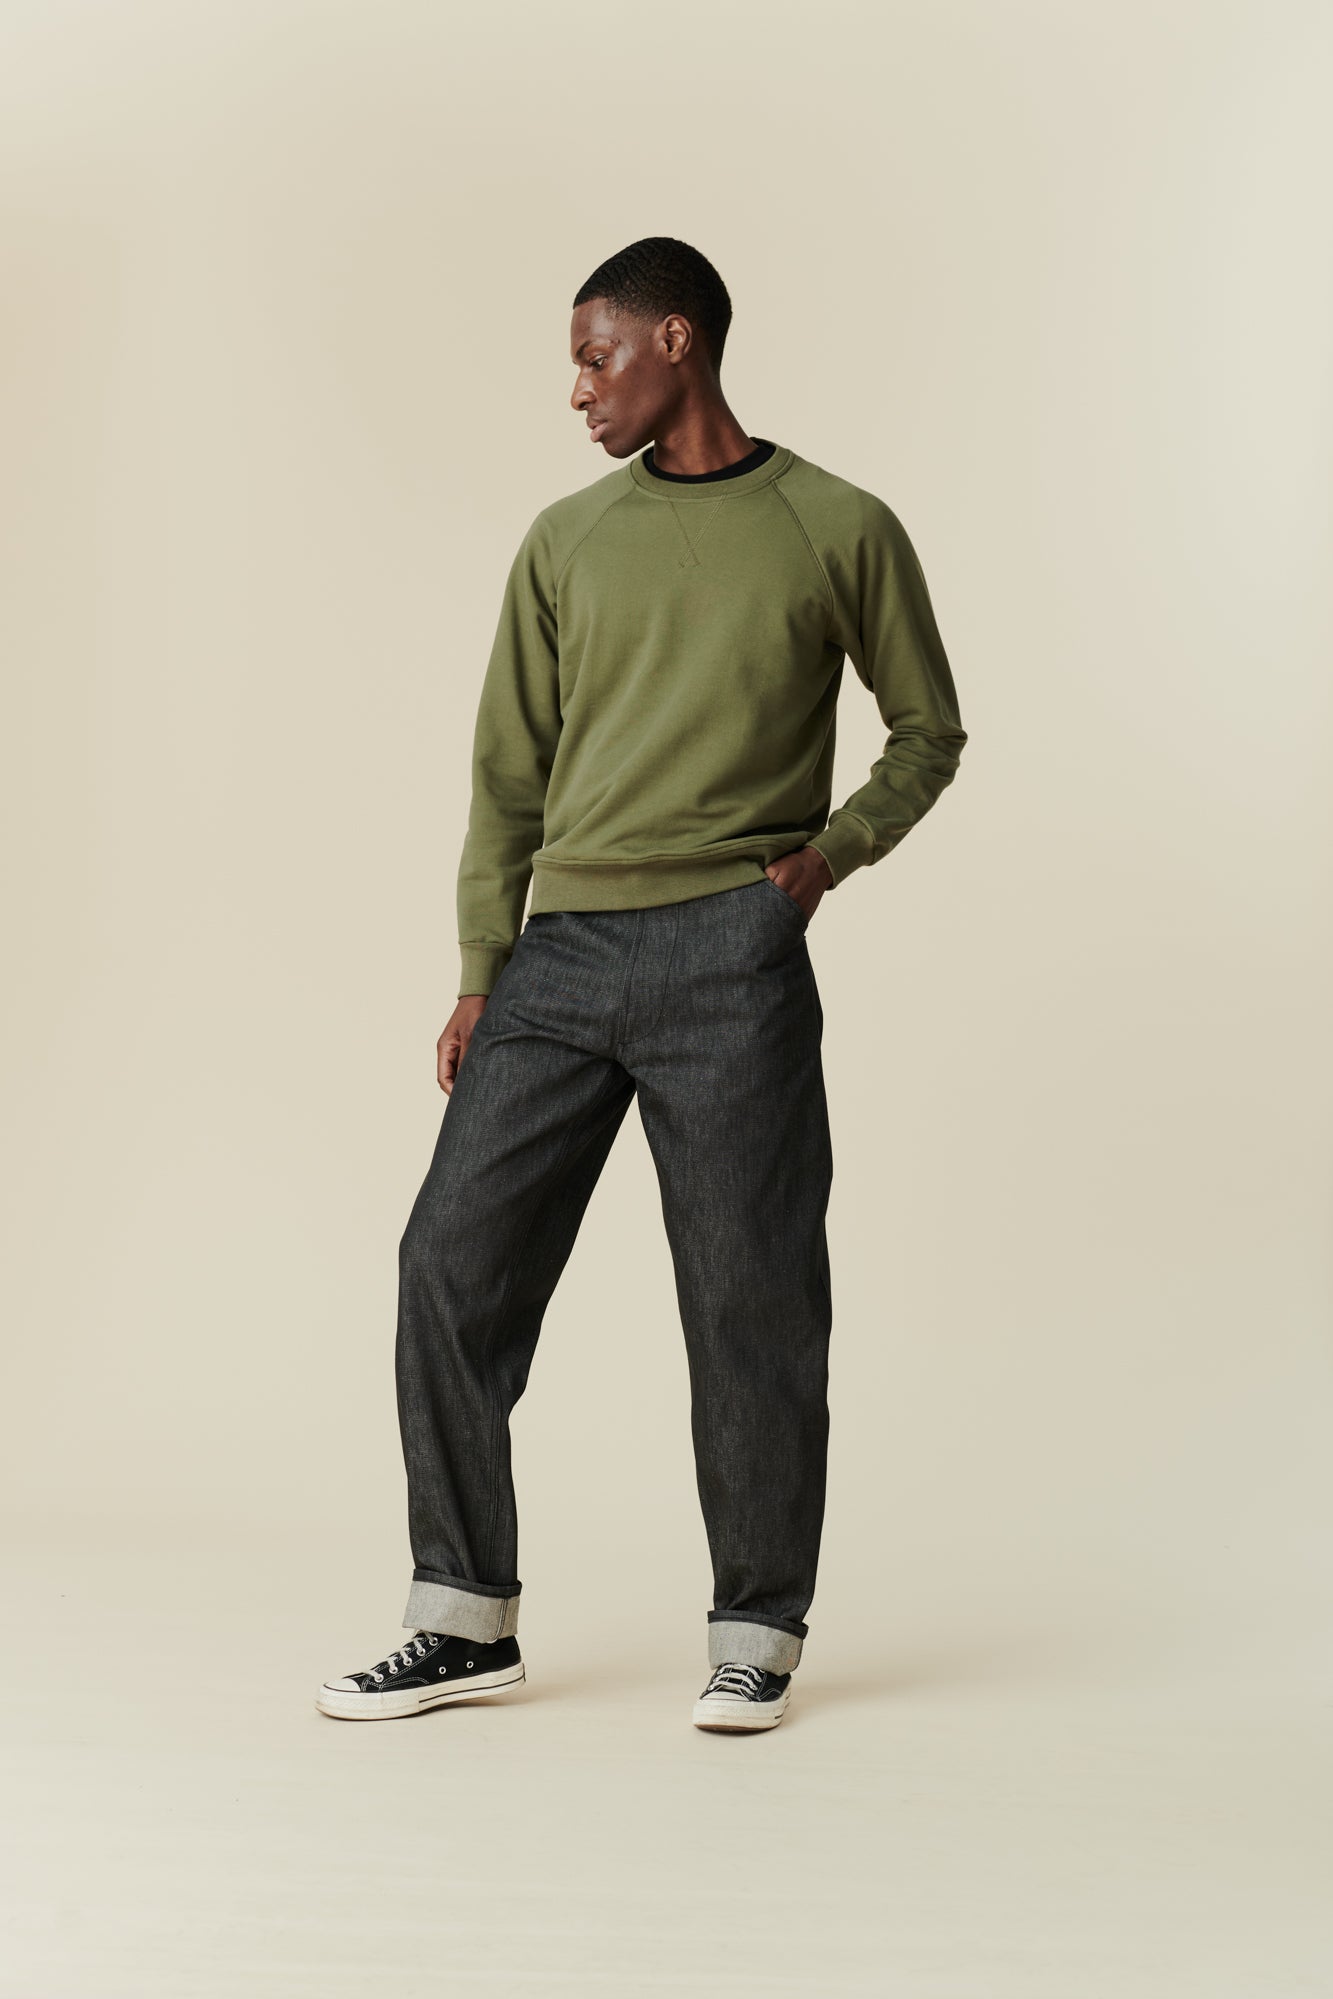 Full body image of black male wearing men's Chore jeans in black, wide leg and tapered fit with rolled hem, worn with olive green raglan sweatshirt